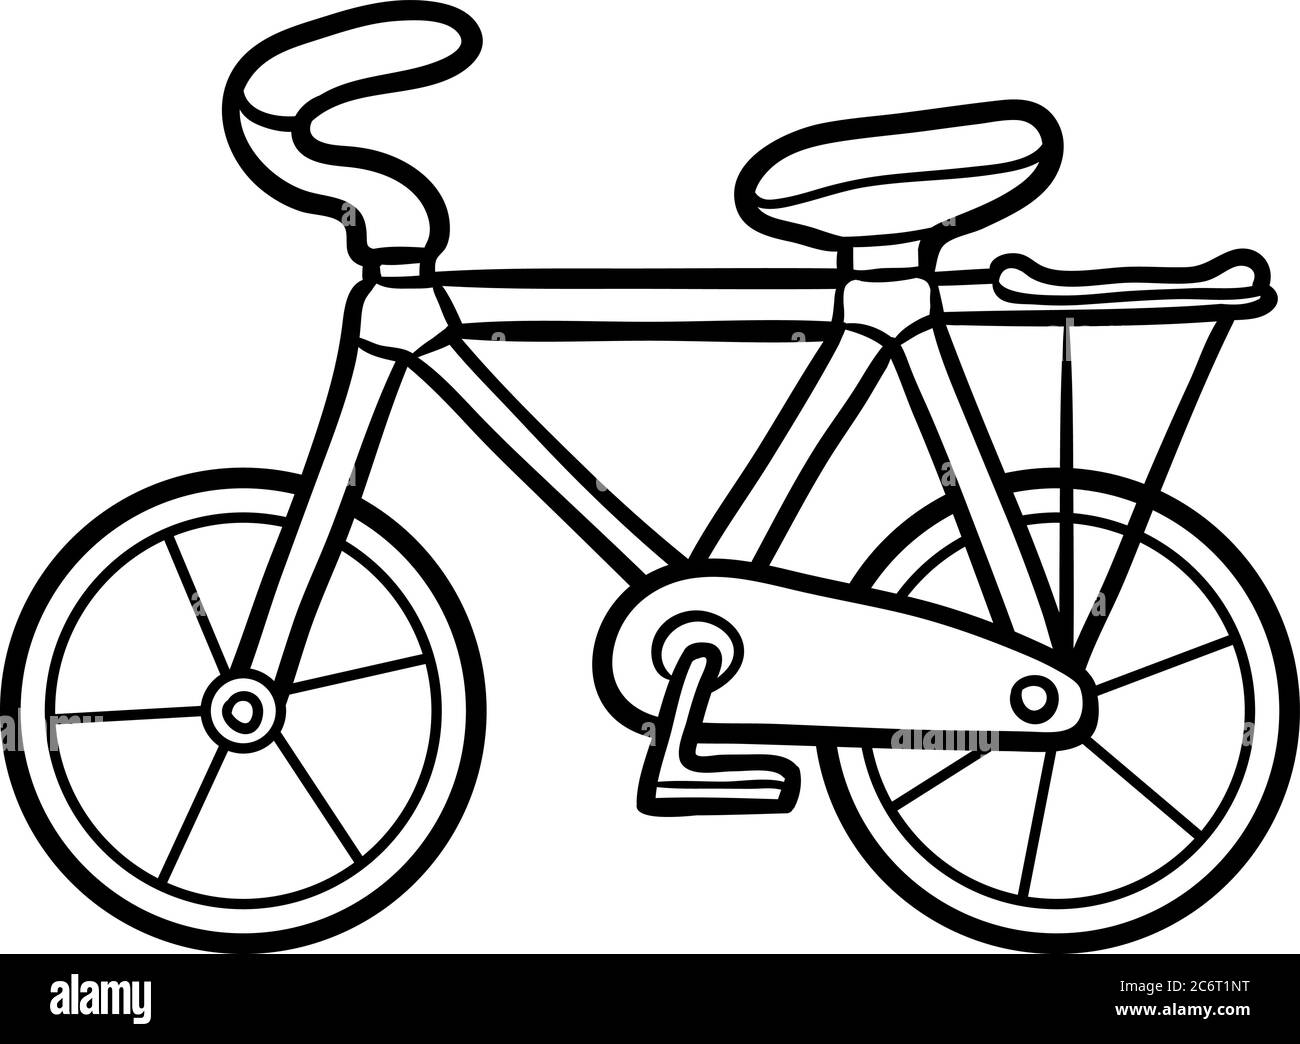 kid bike coloring pages